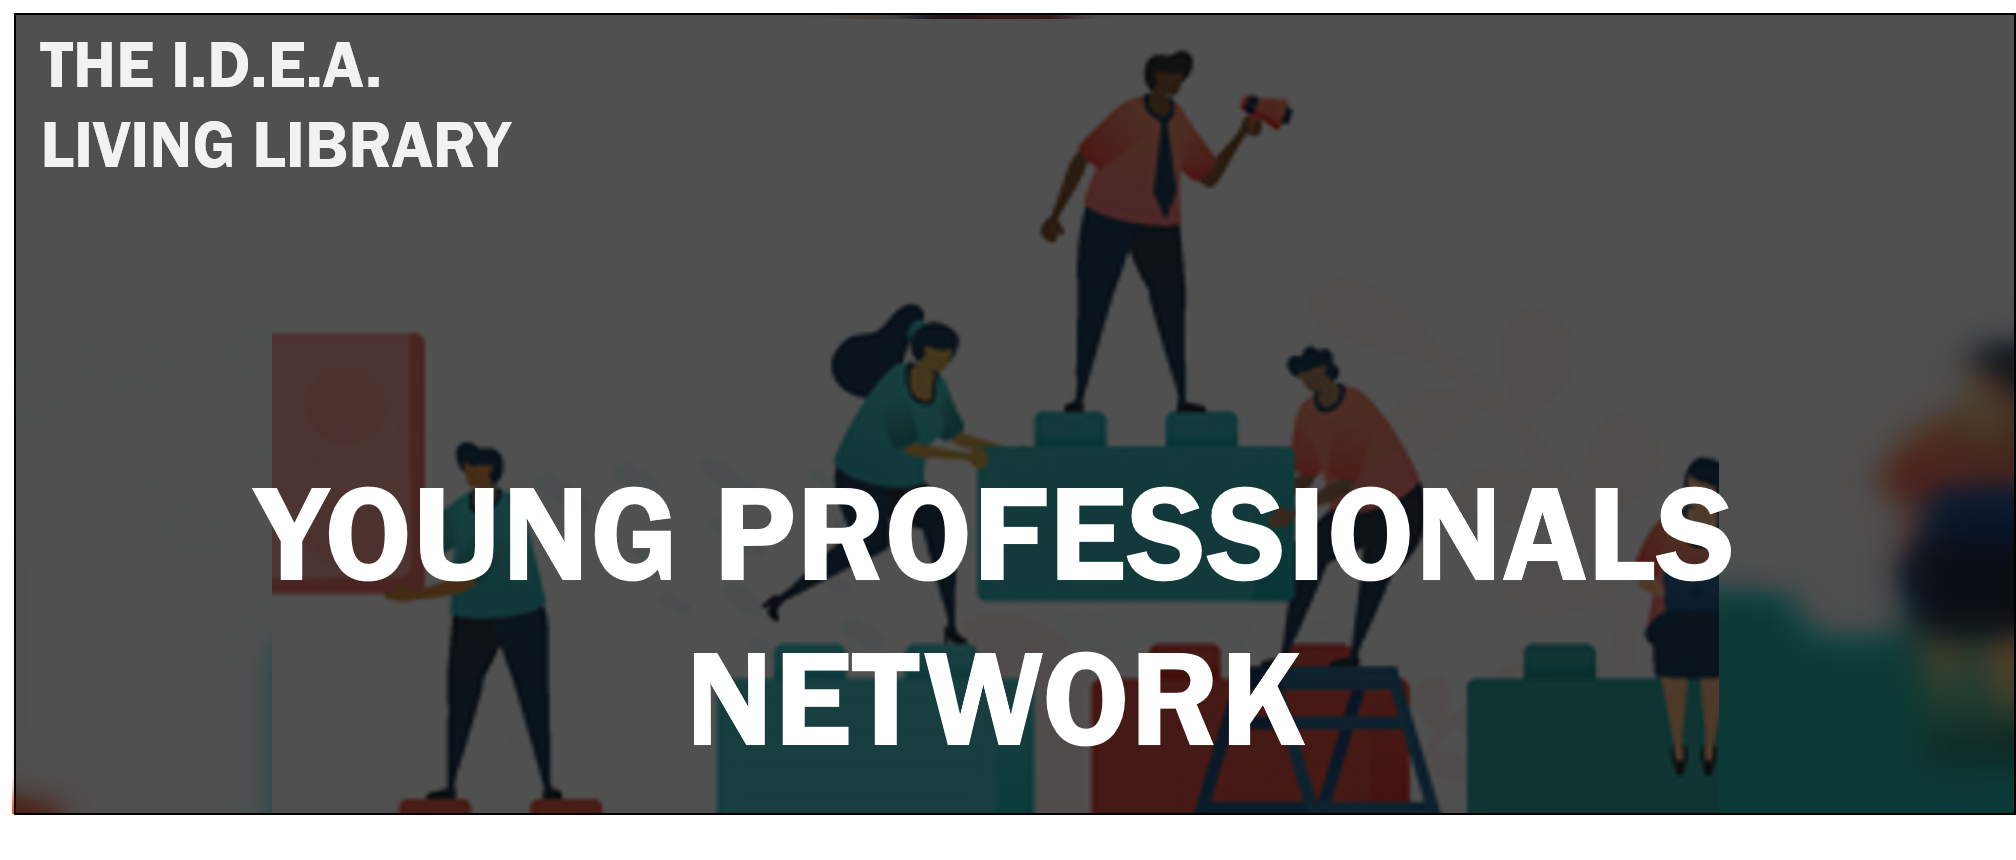 Young Professionals Network, Indigenous Services Canada/Crown Indigenous Relations and Northern Affairs